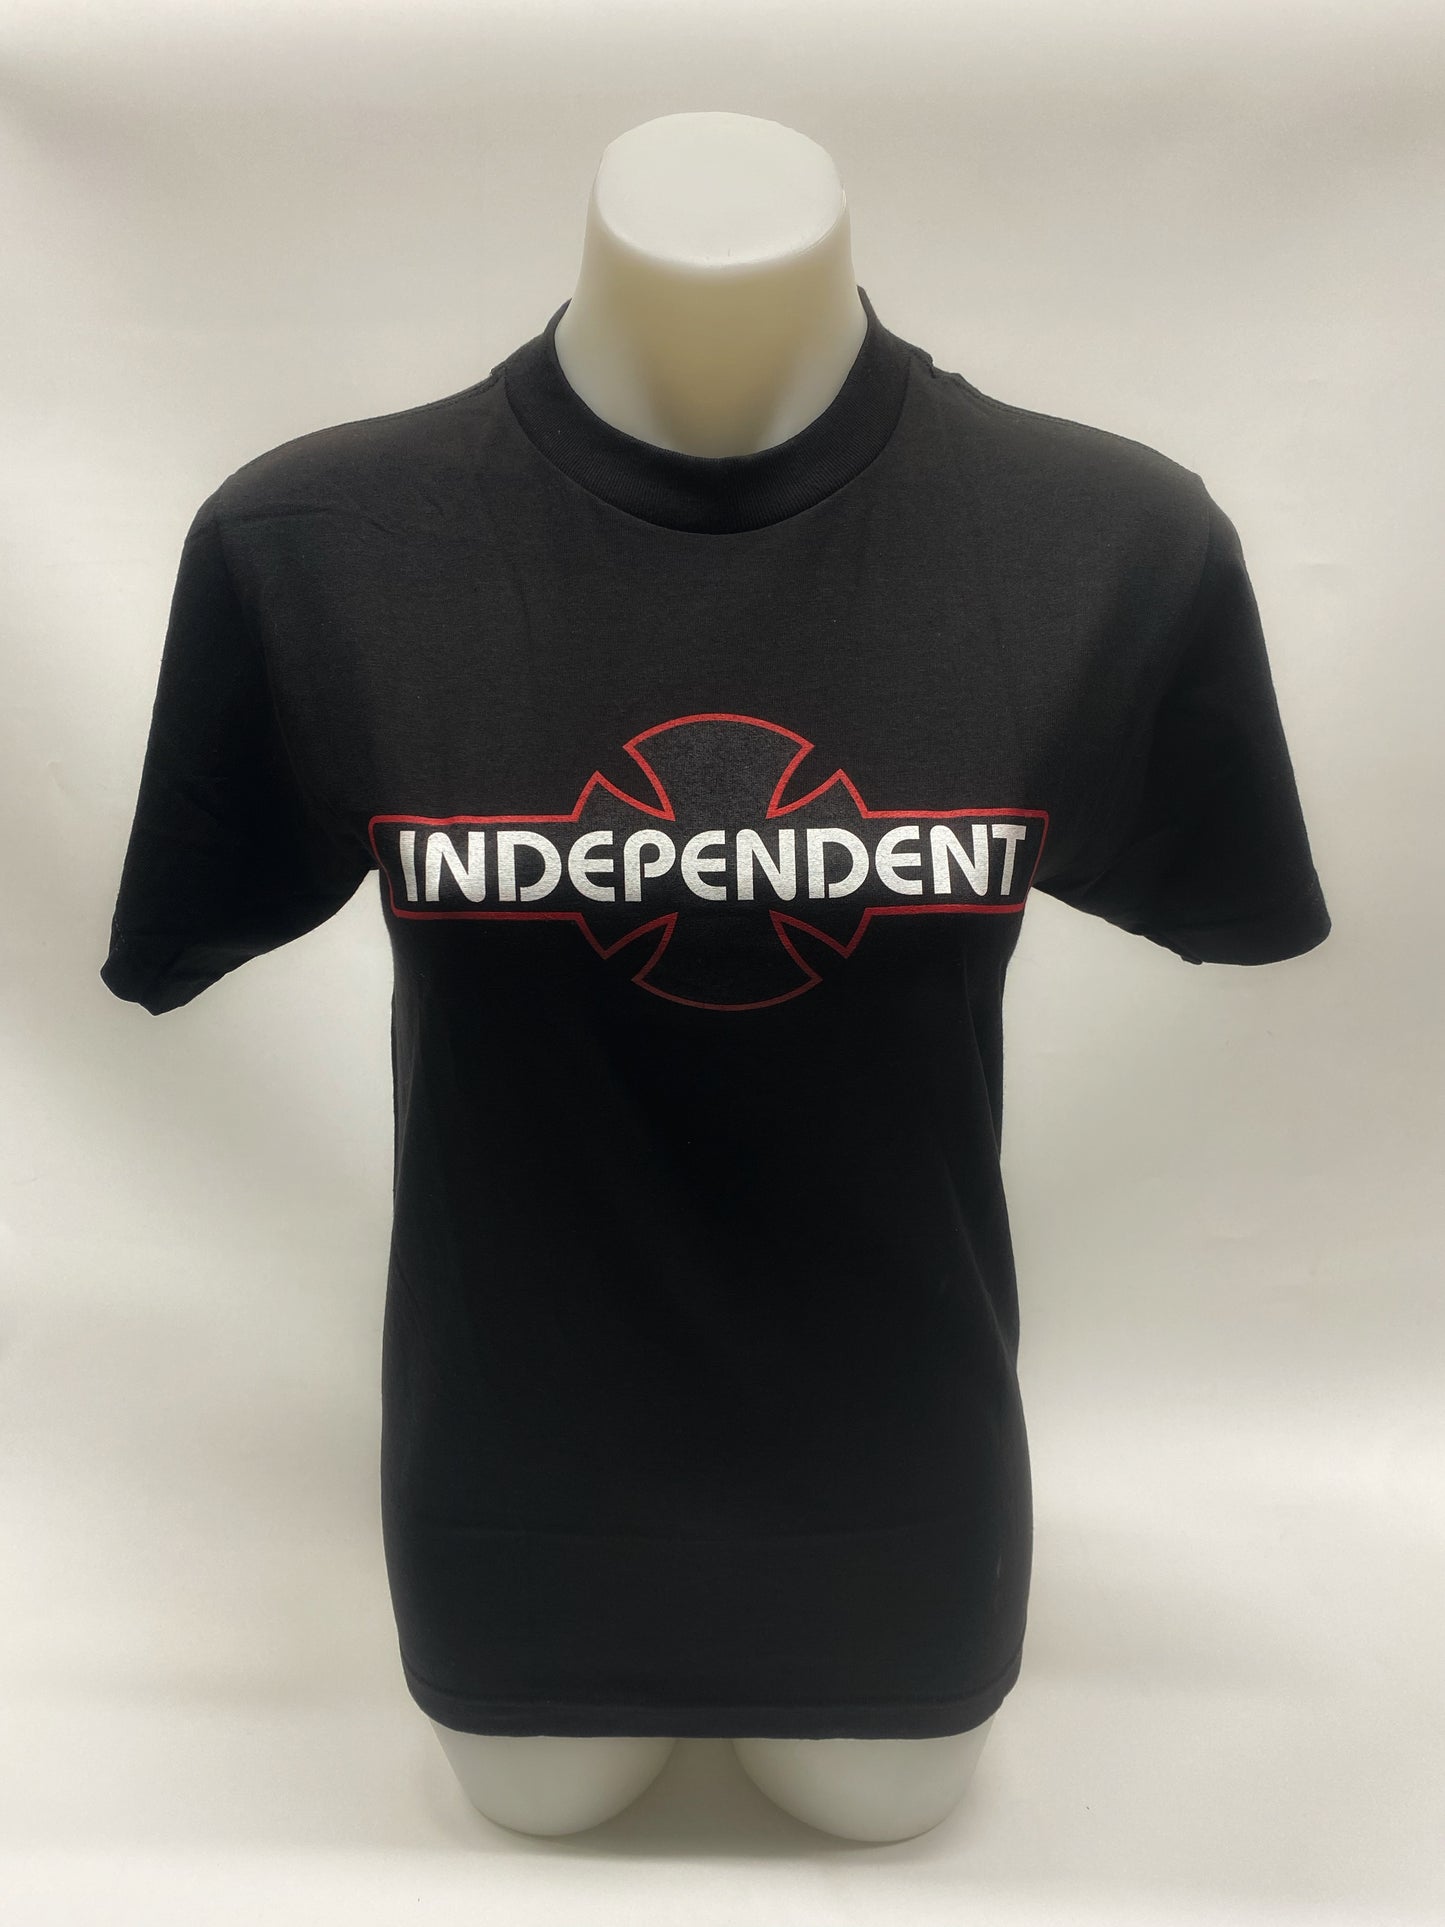 Independent T Shirt Small